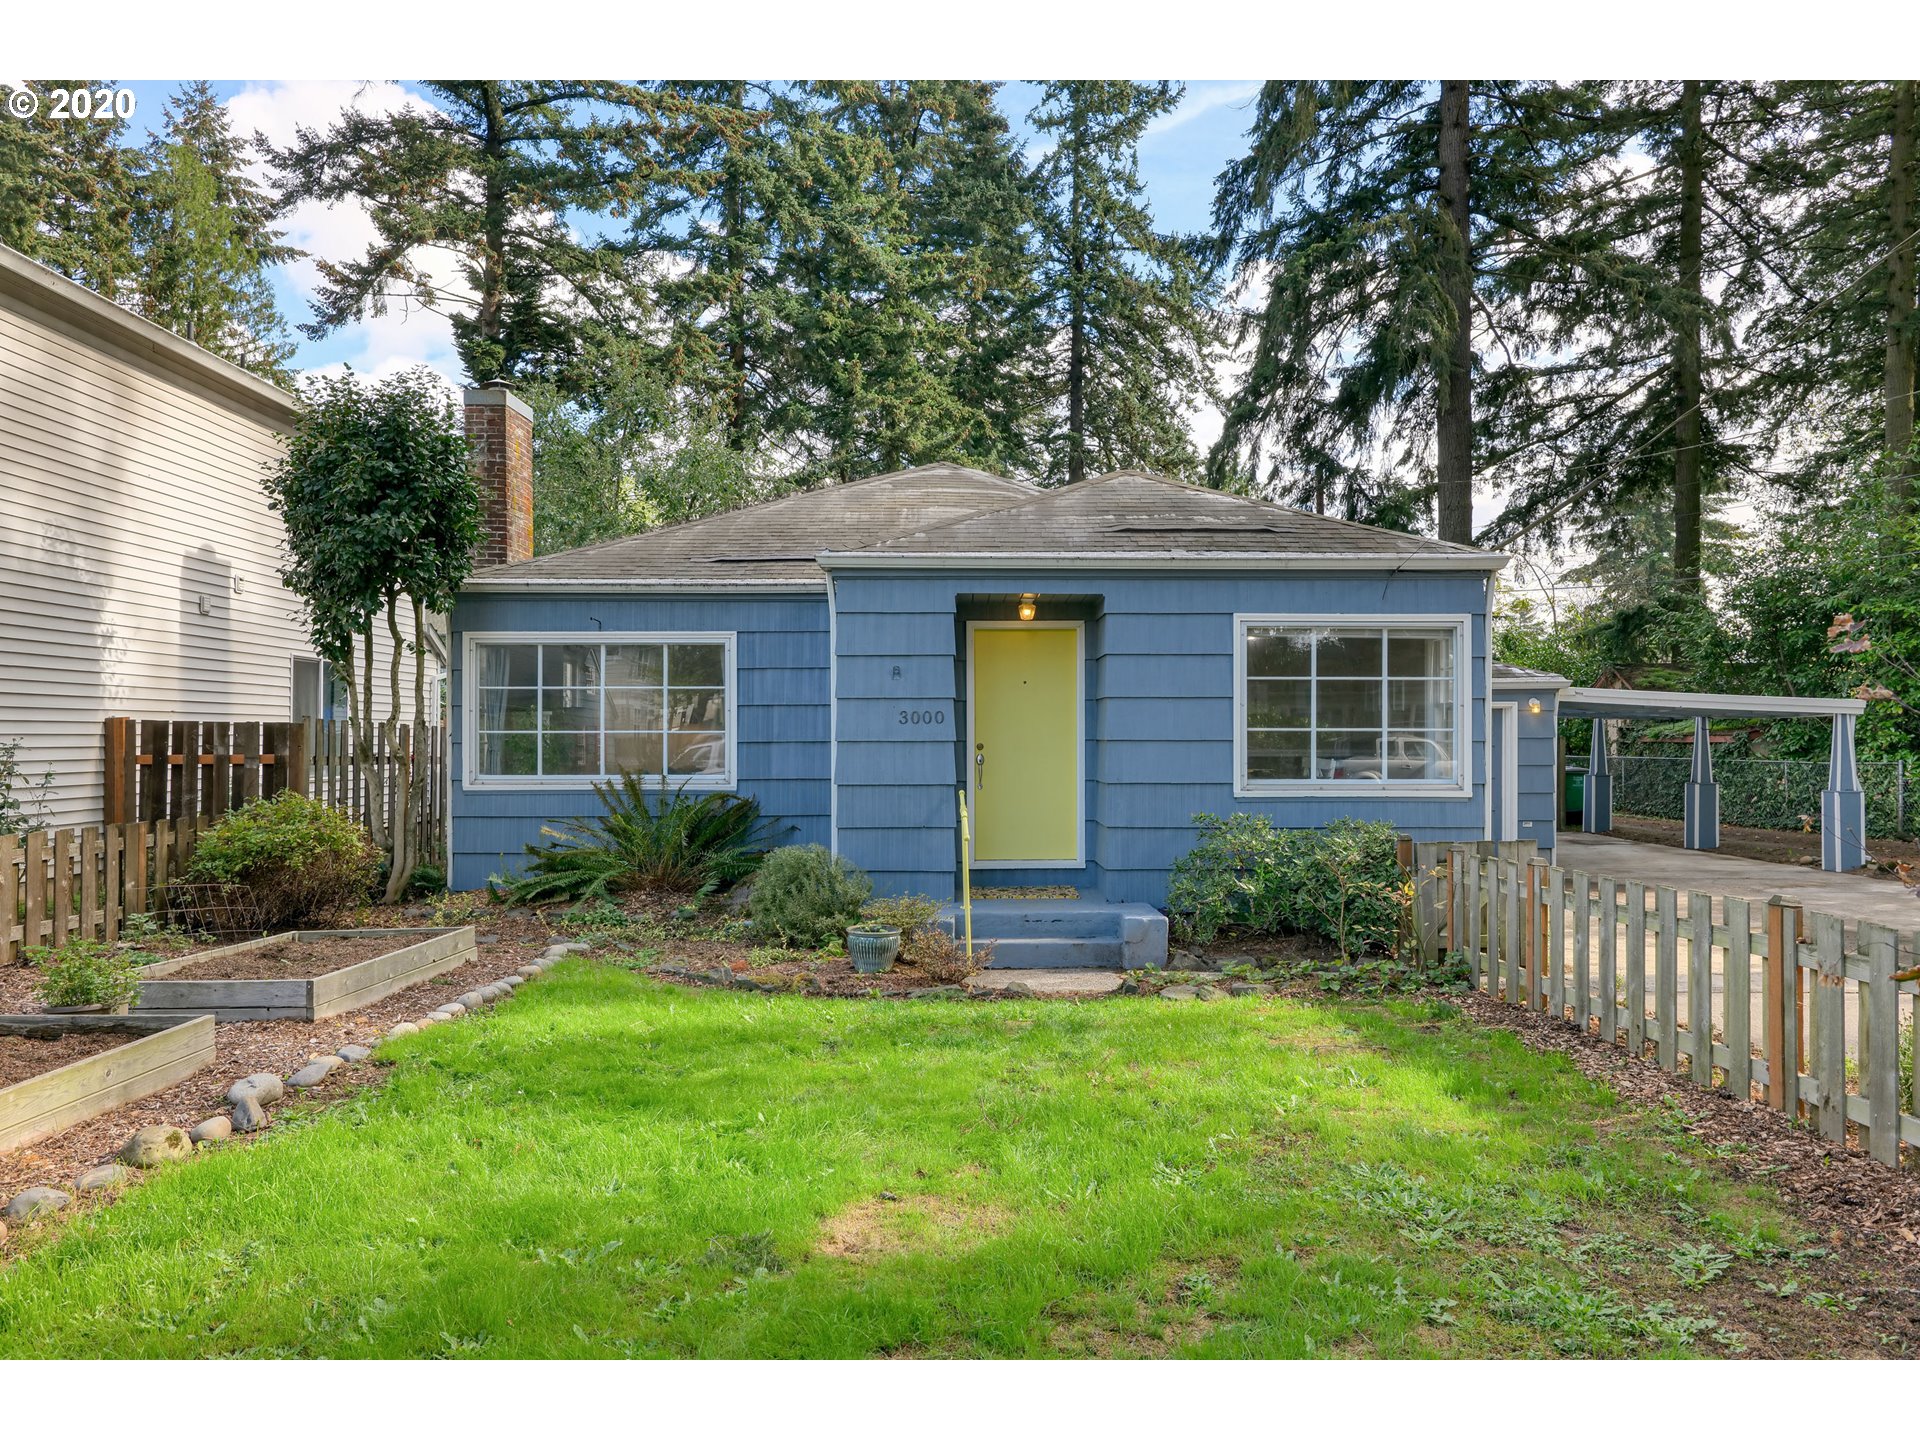 3000 SE 118TH AVE (1 of 20)